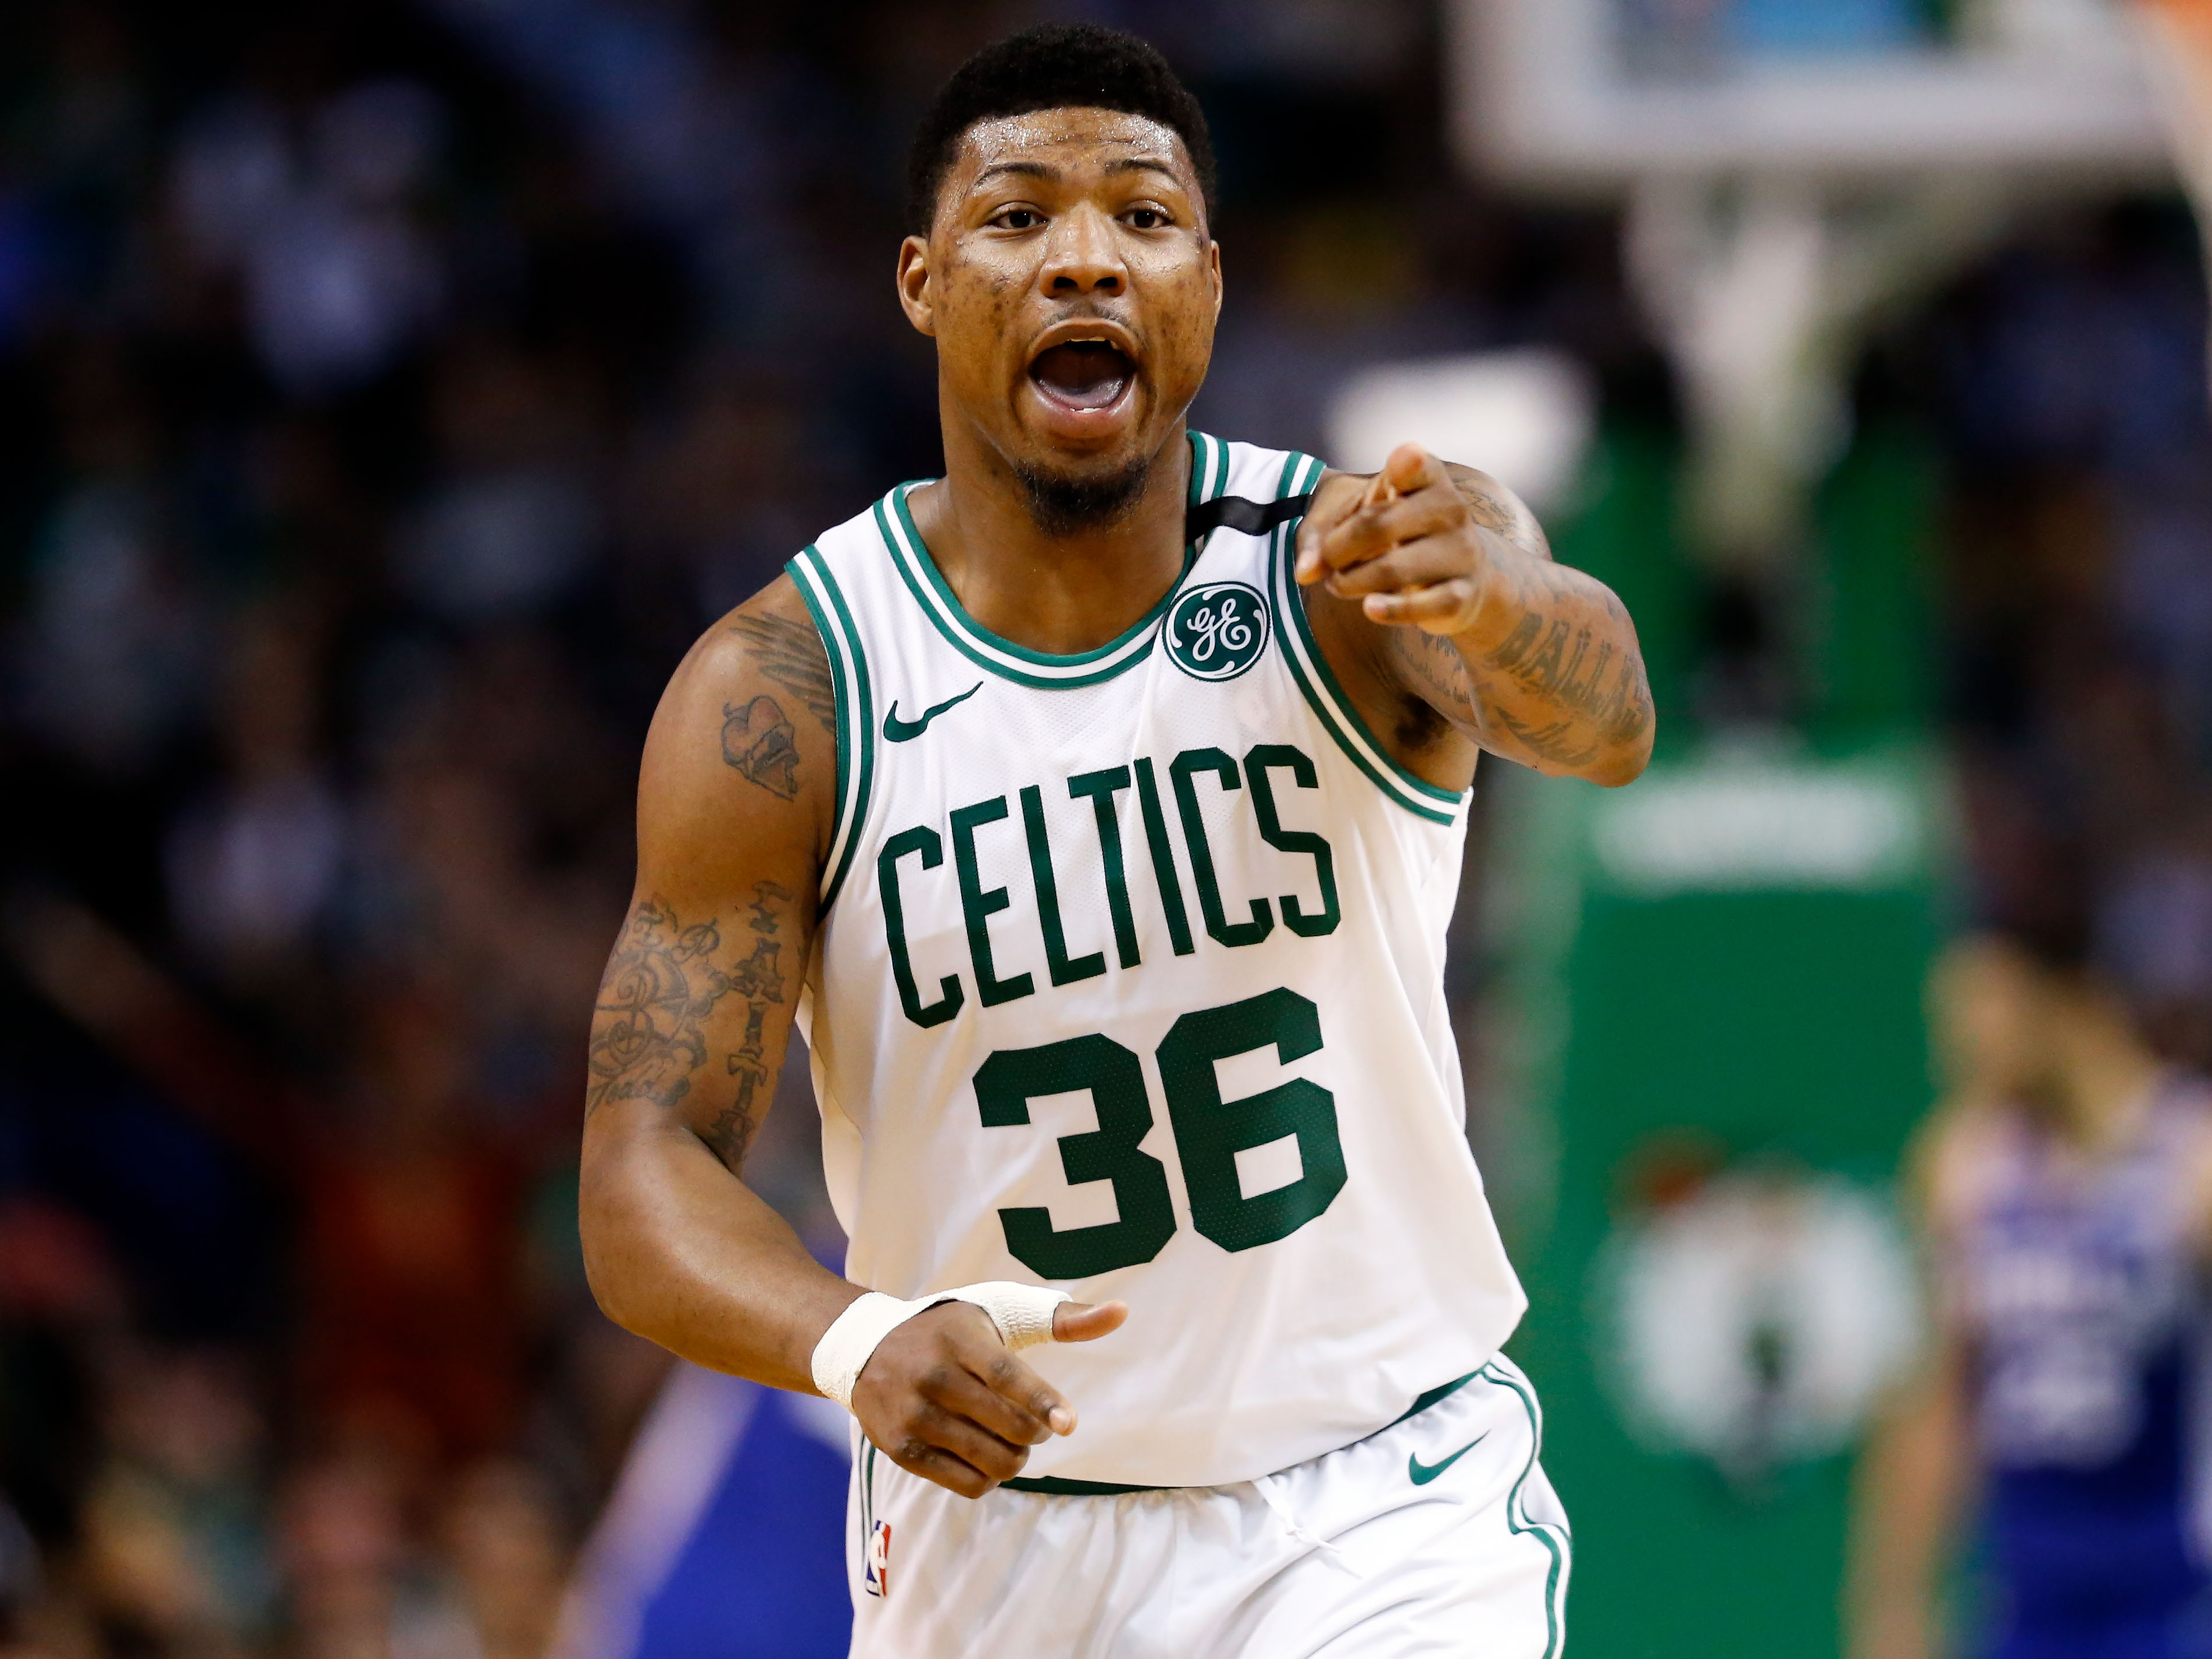 Four potential Marcus Smart landing spots in free agency